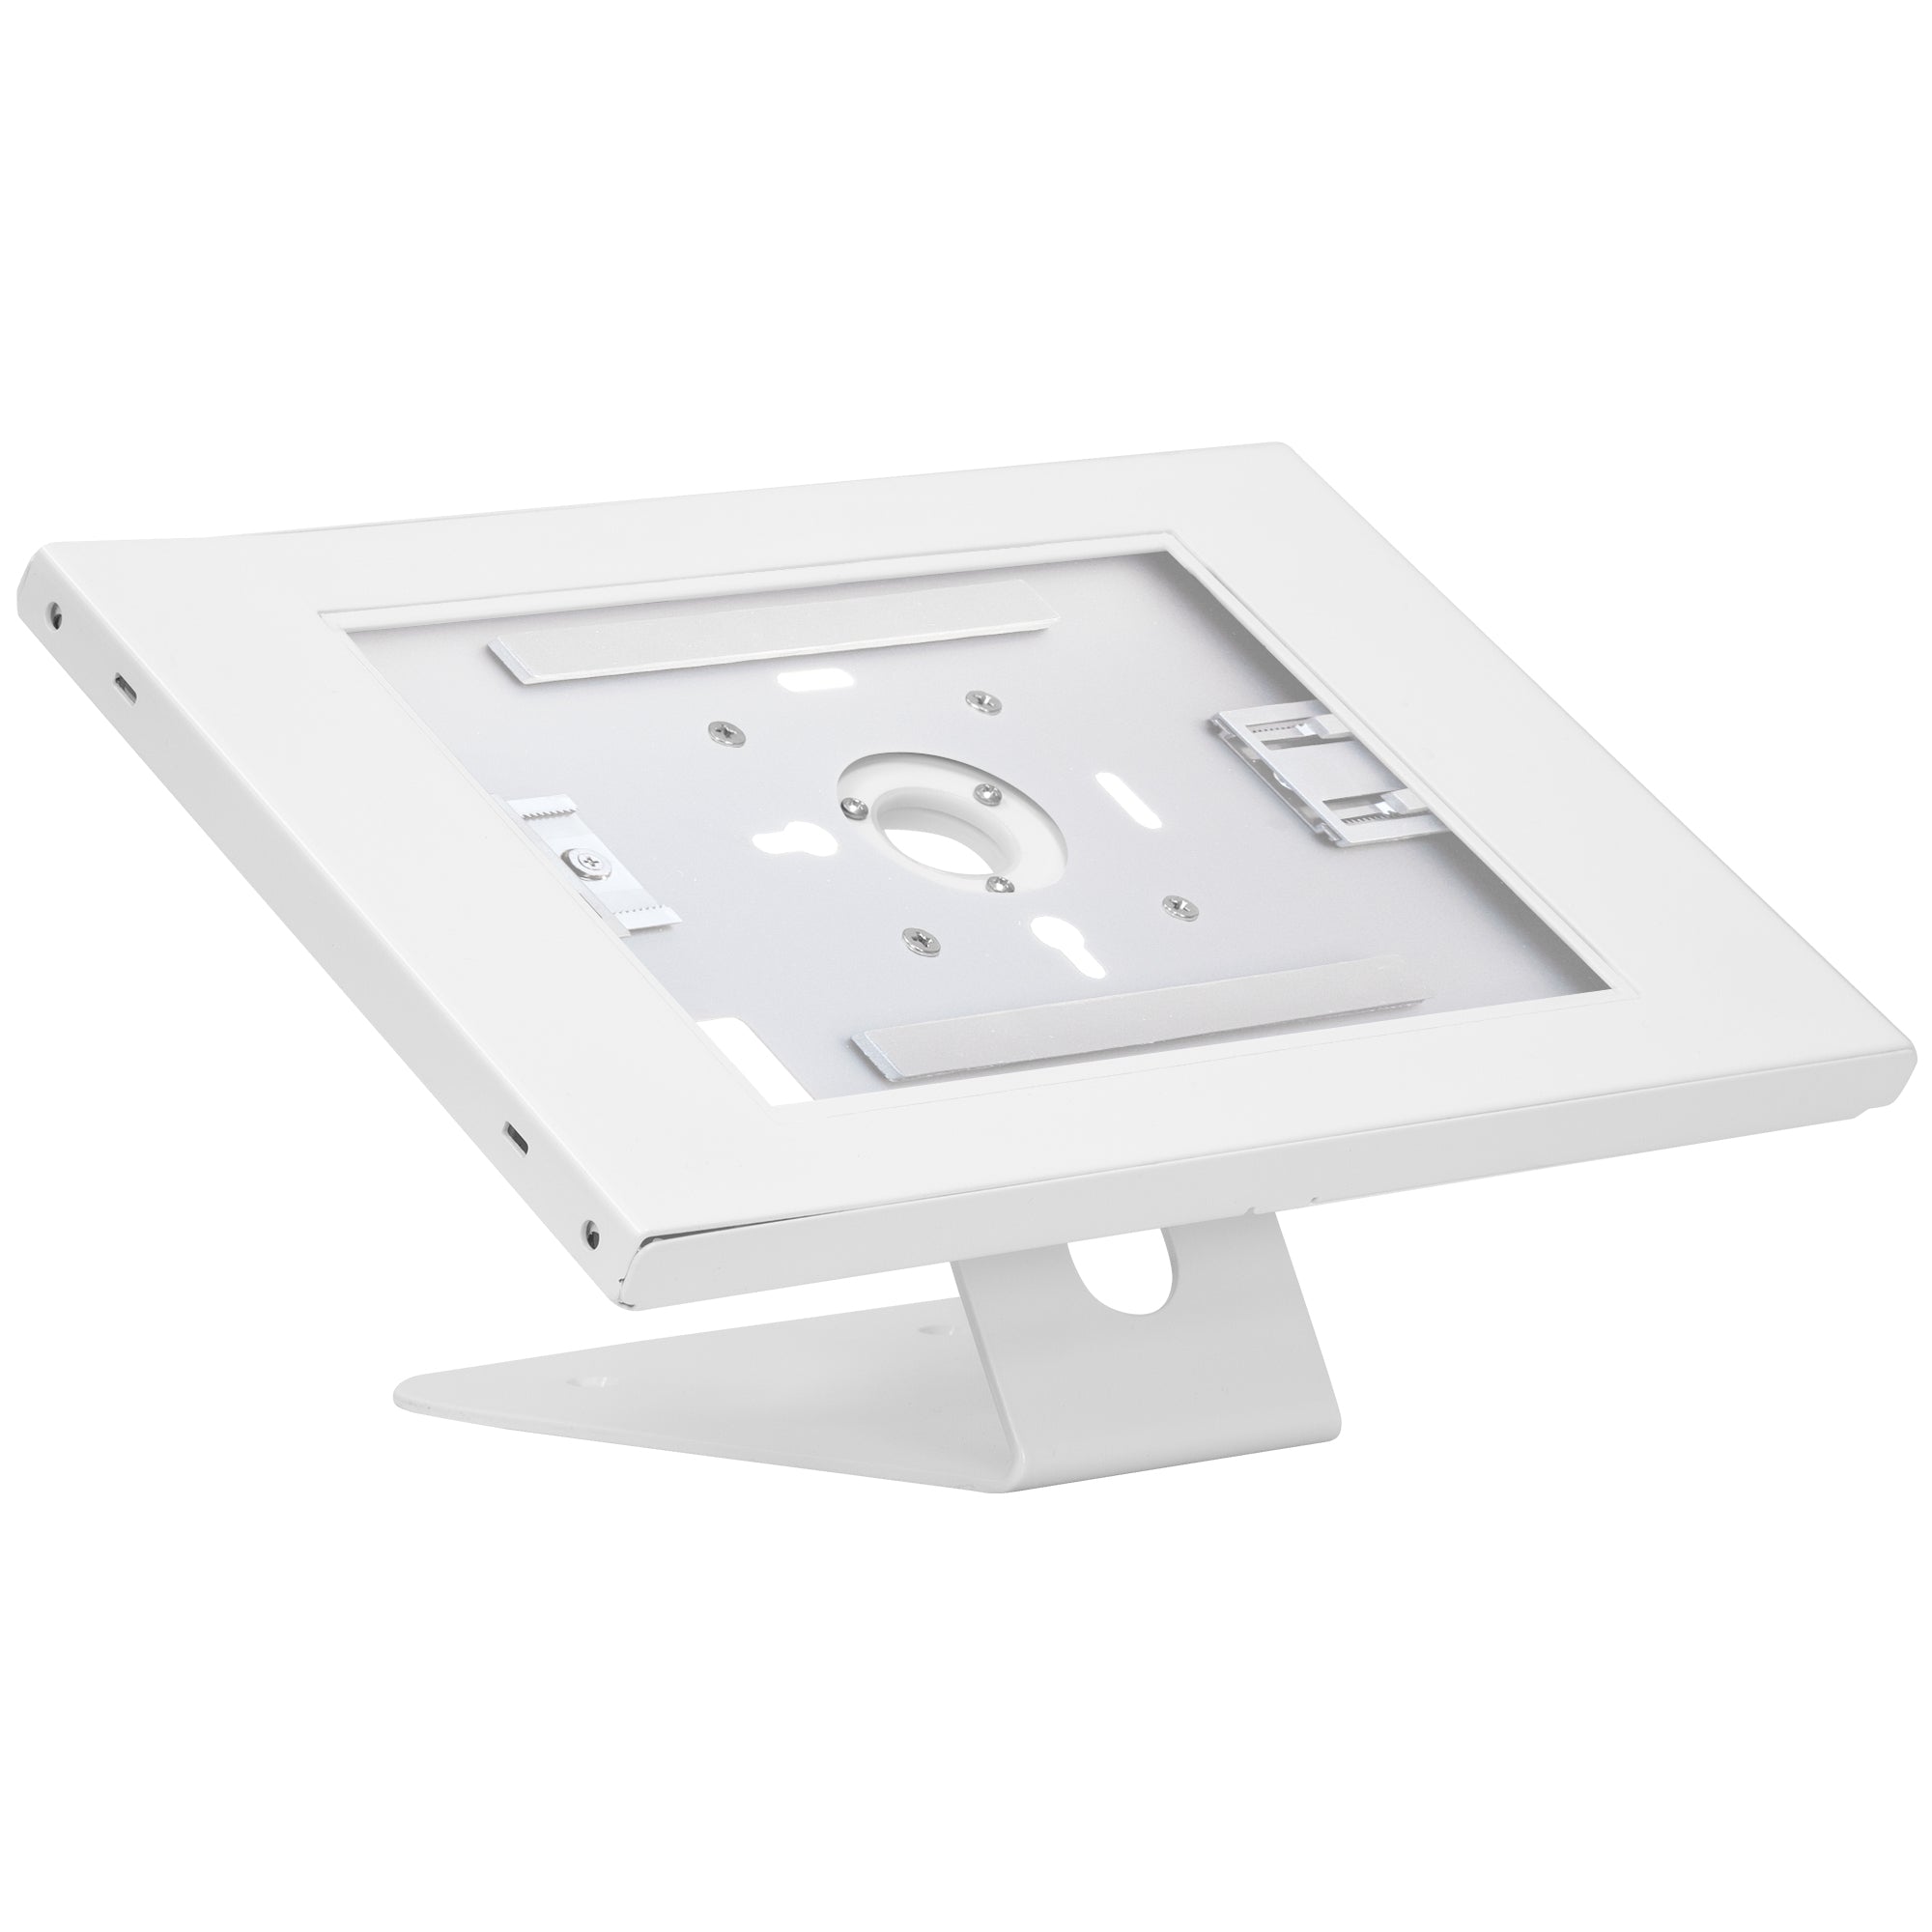 Anti-Theft Tablet Countertop Stand / Wall Mount